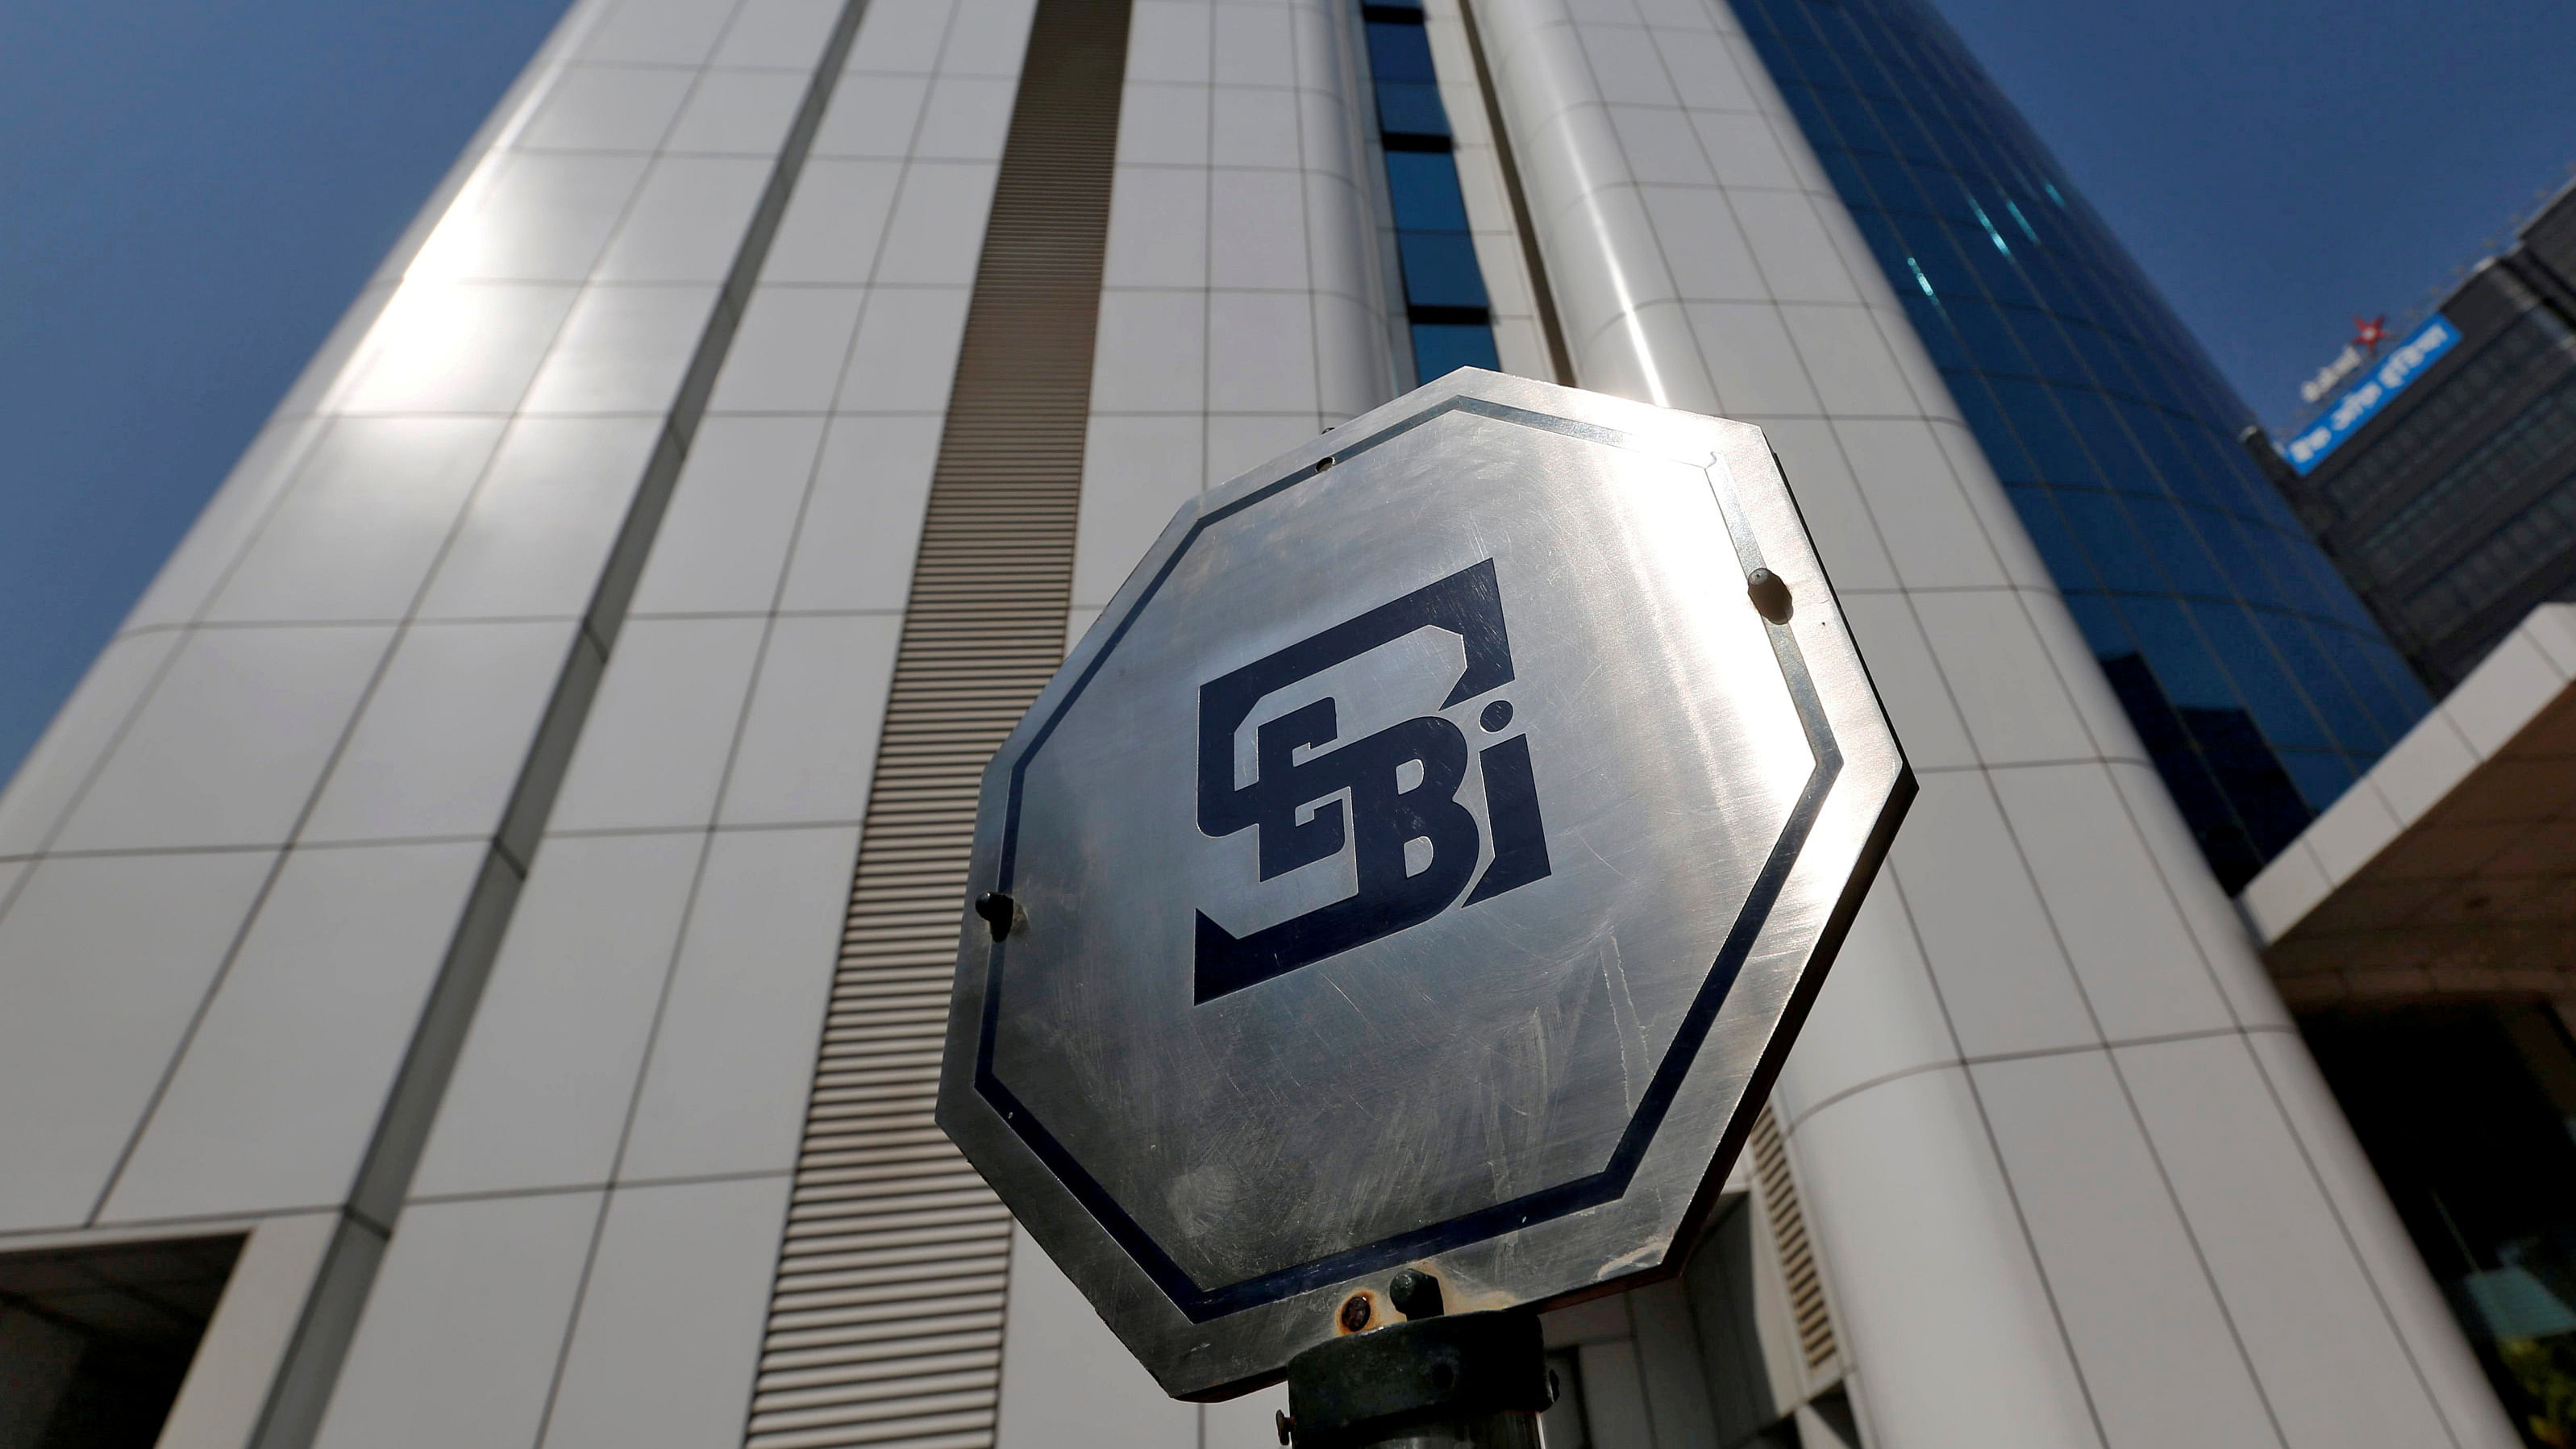 One safeguard is that under the Sebi regulations, promoters are simply barred from being issued ESOPs. The second safeguard is that the approval of the shareholders by way of a special resolution is required for issuing ESOPs. Credit: Reuters Photo